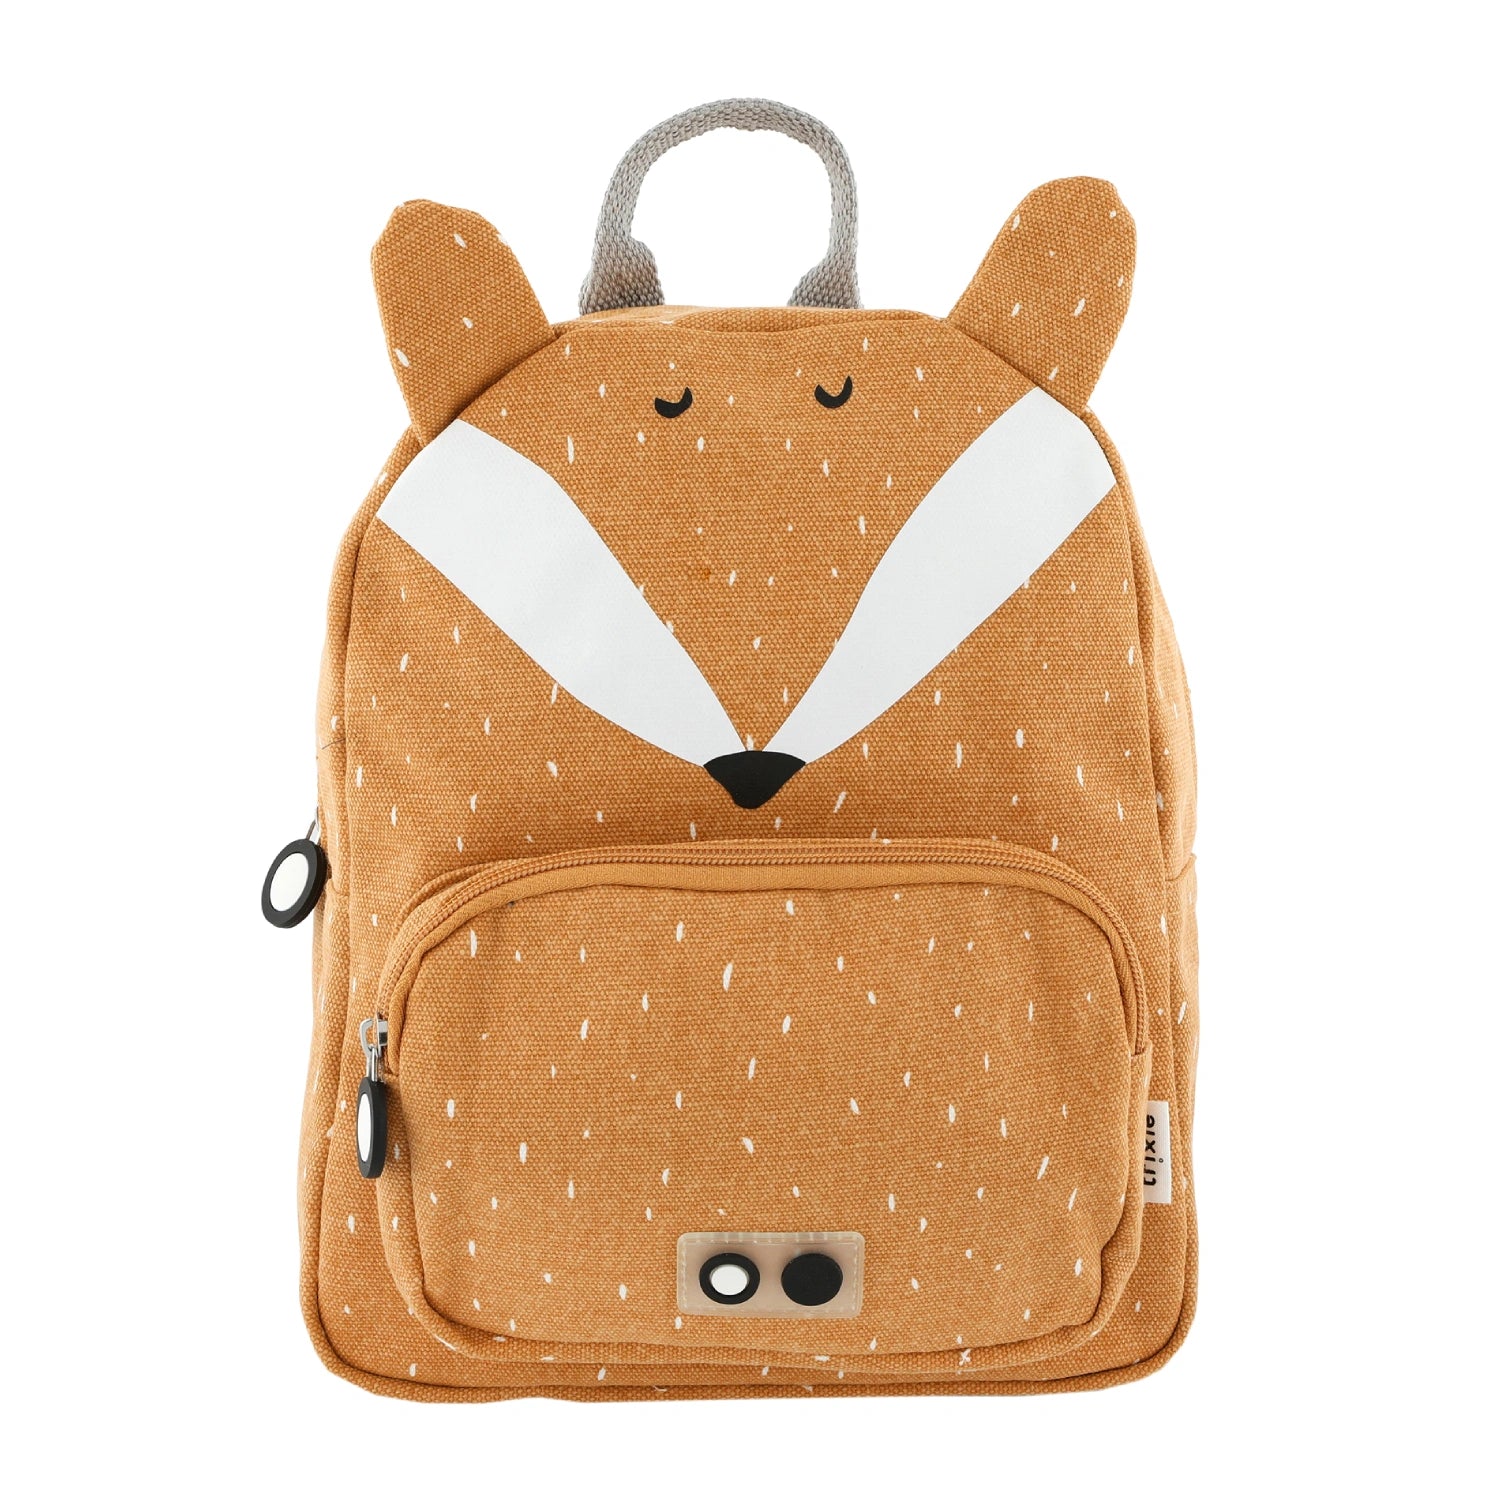 An image of Kids School Backpack - Trixie Bag Collection Mr. Fox